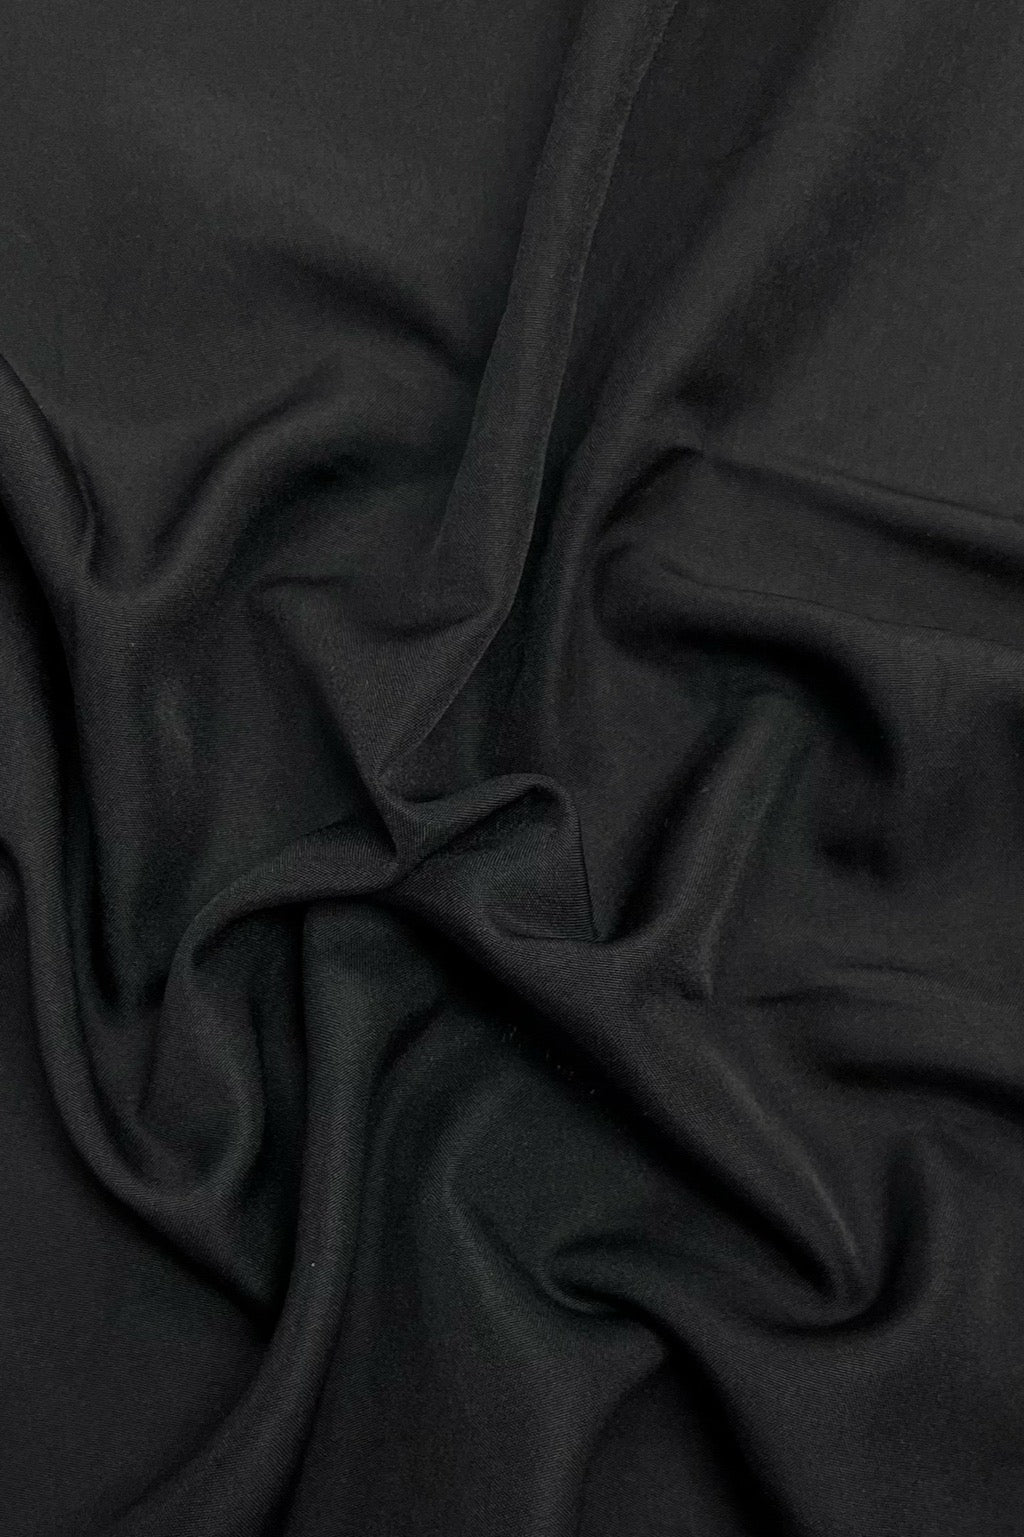 Plain Smooth Crepe Polyester Fabric